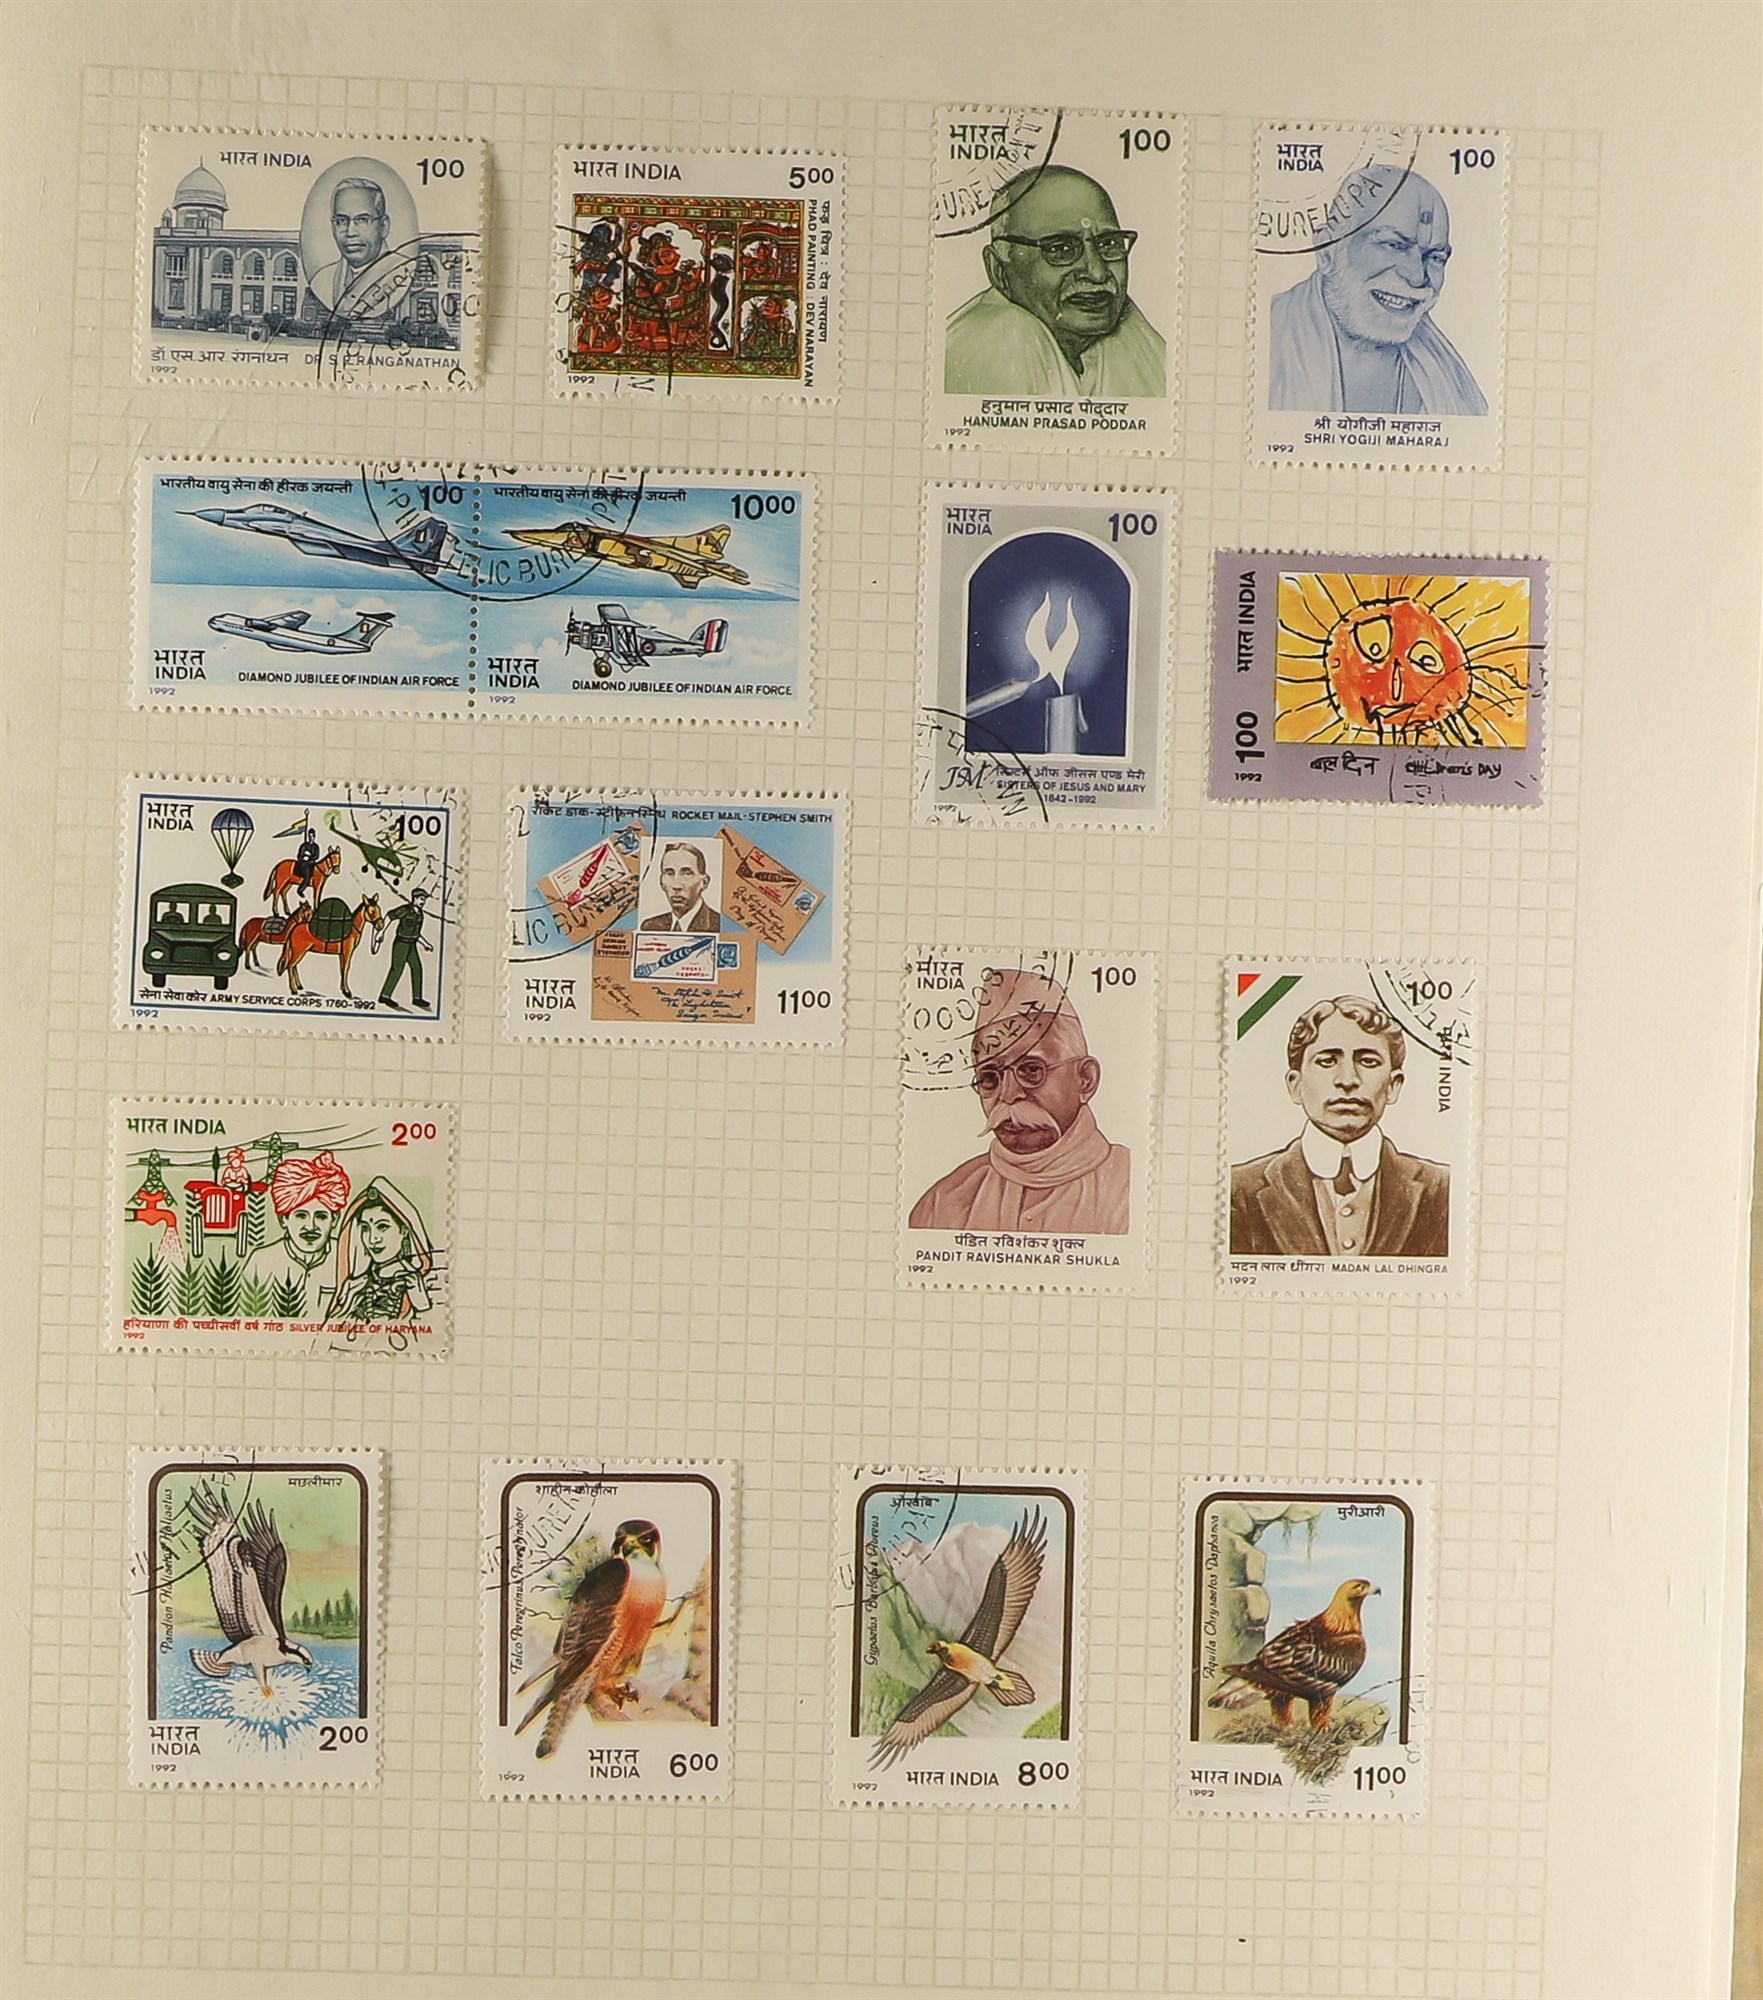 INDIA 1974 - 1992 COMMEMORATIVES USED COLLECTION complete from 1974 Patriot & Ruler 25p to the end - Image 15 of 16